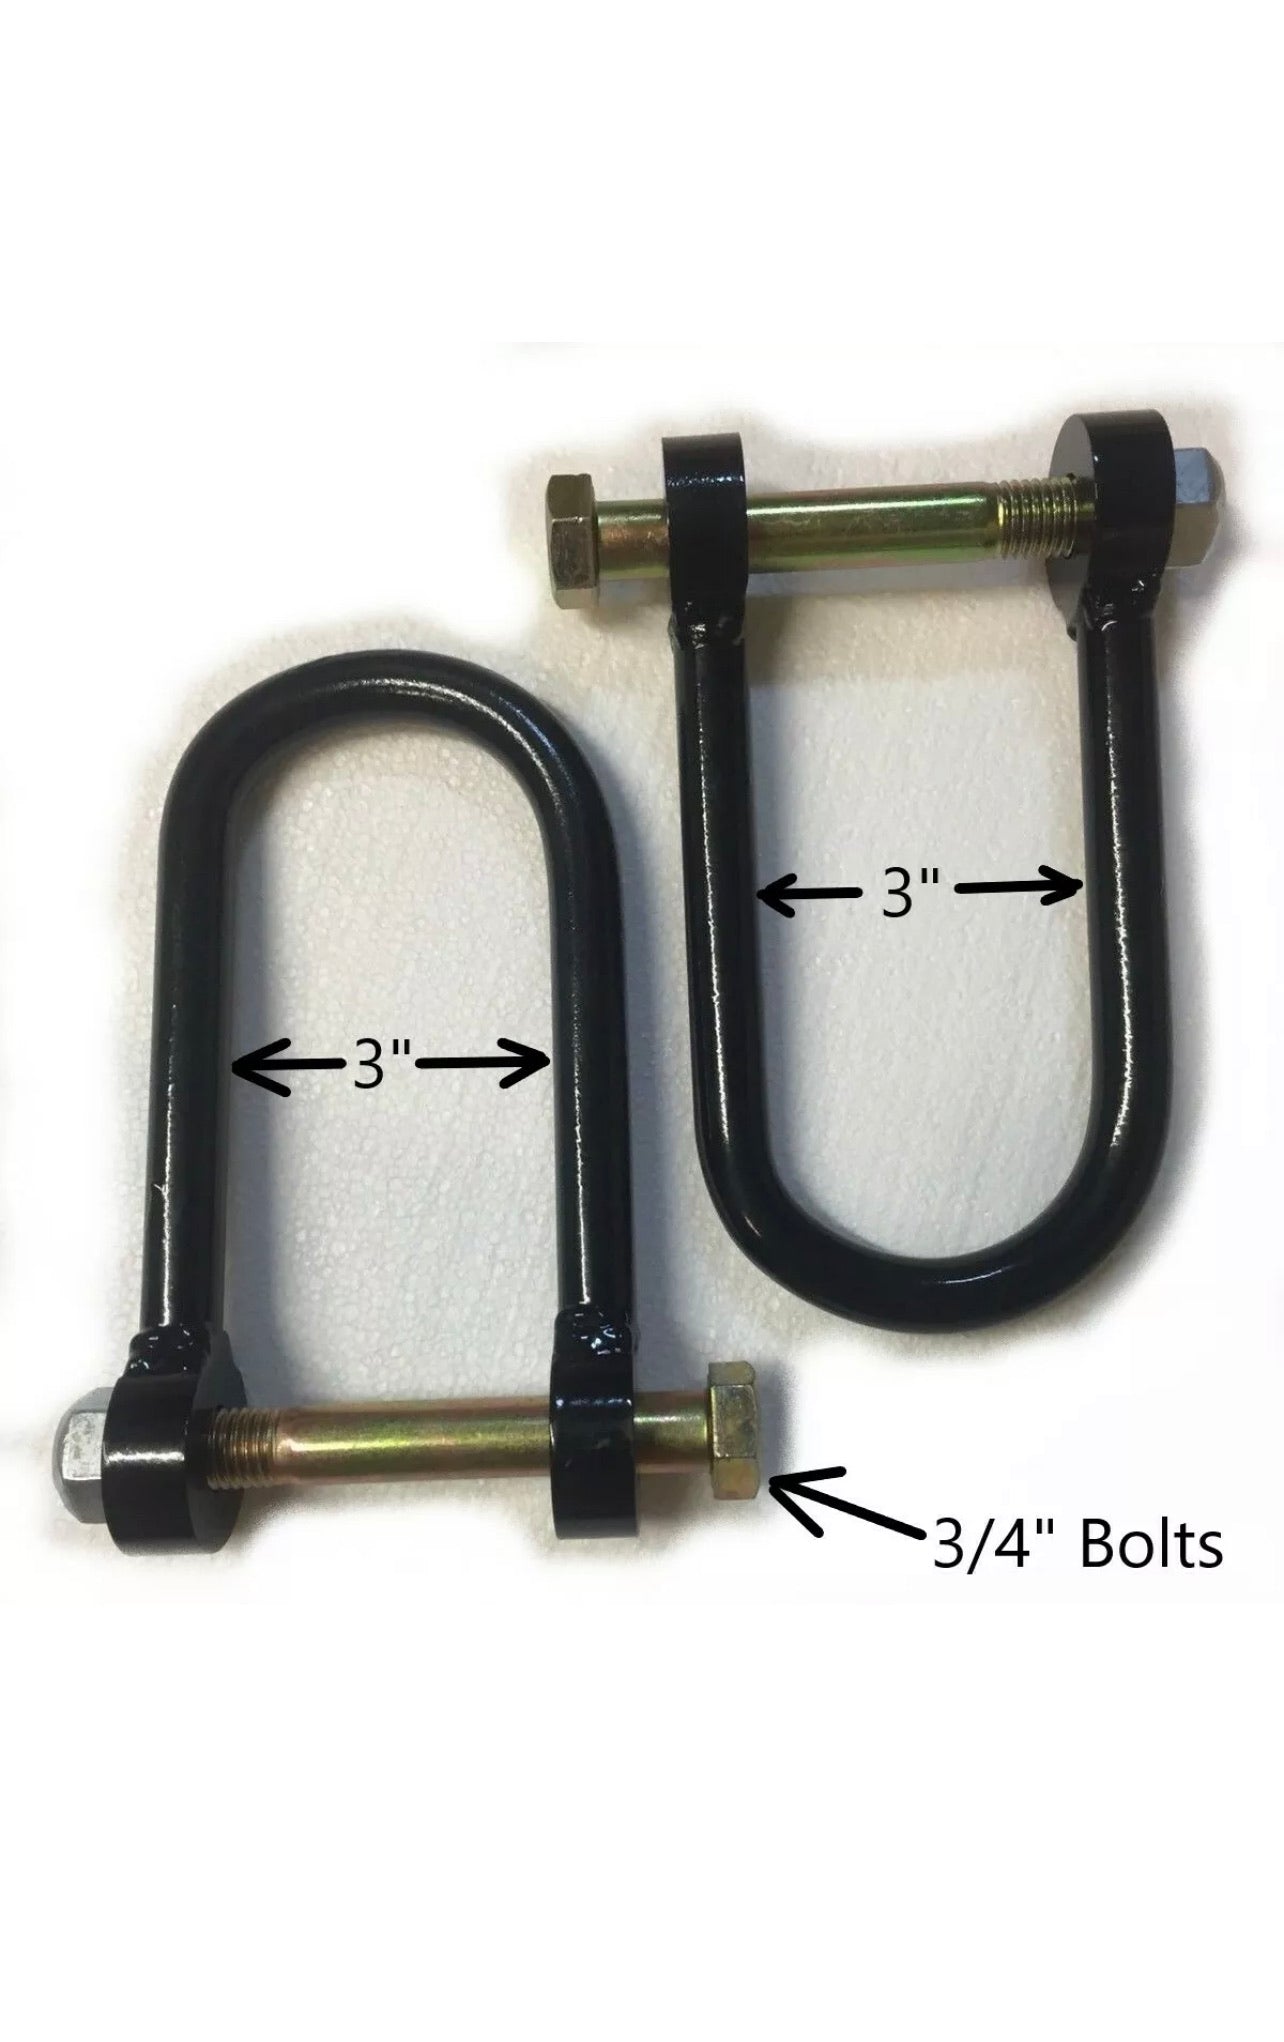 WELDED CLEVIS PAIR - 3" x 9" AIRLIFT BUMPER MILITARY HUMVEE A2 BUMPER SHACKLE